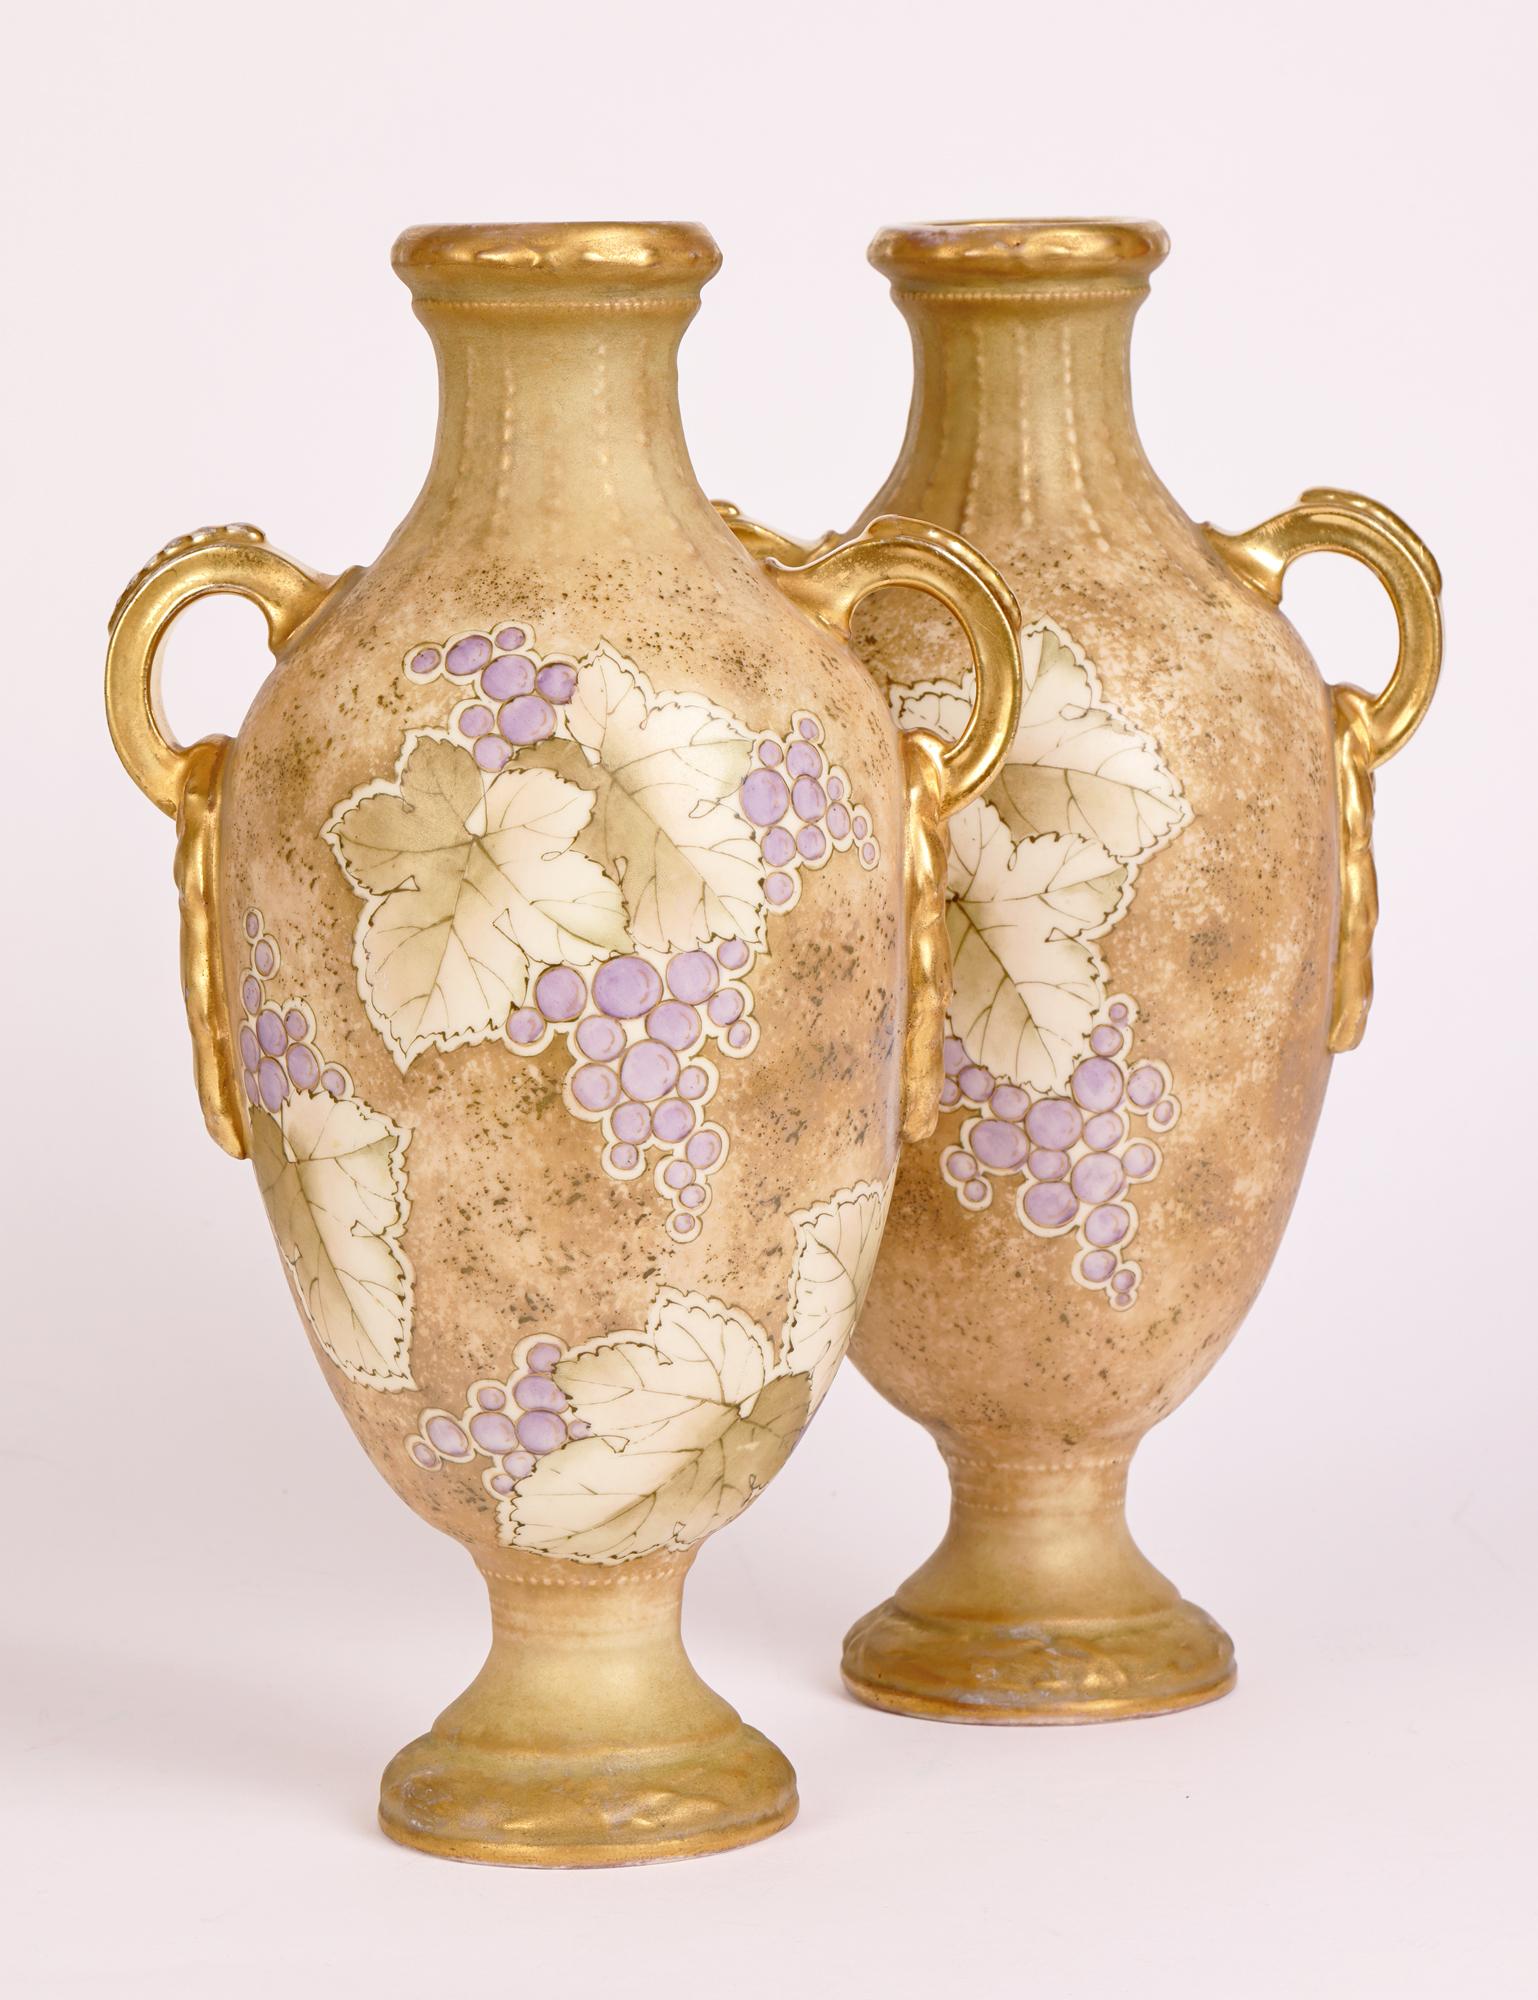 Turn Teplitz RSK Amphora Pair Art Nouveau Hand-Painted Twin Handled Vases For Sale 8